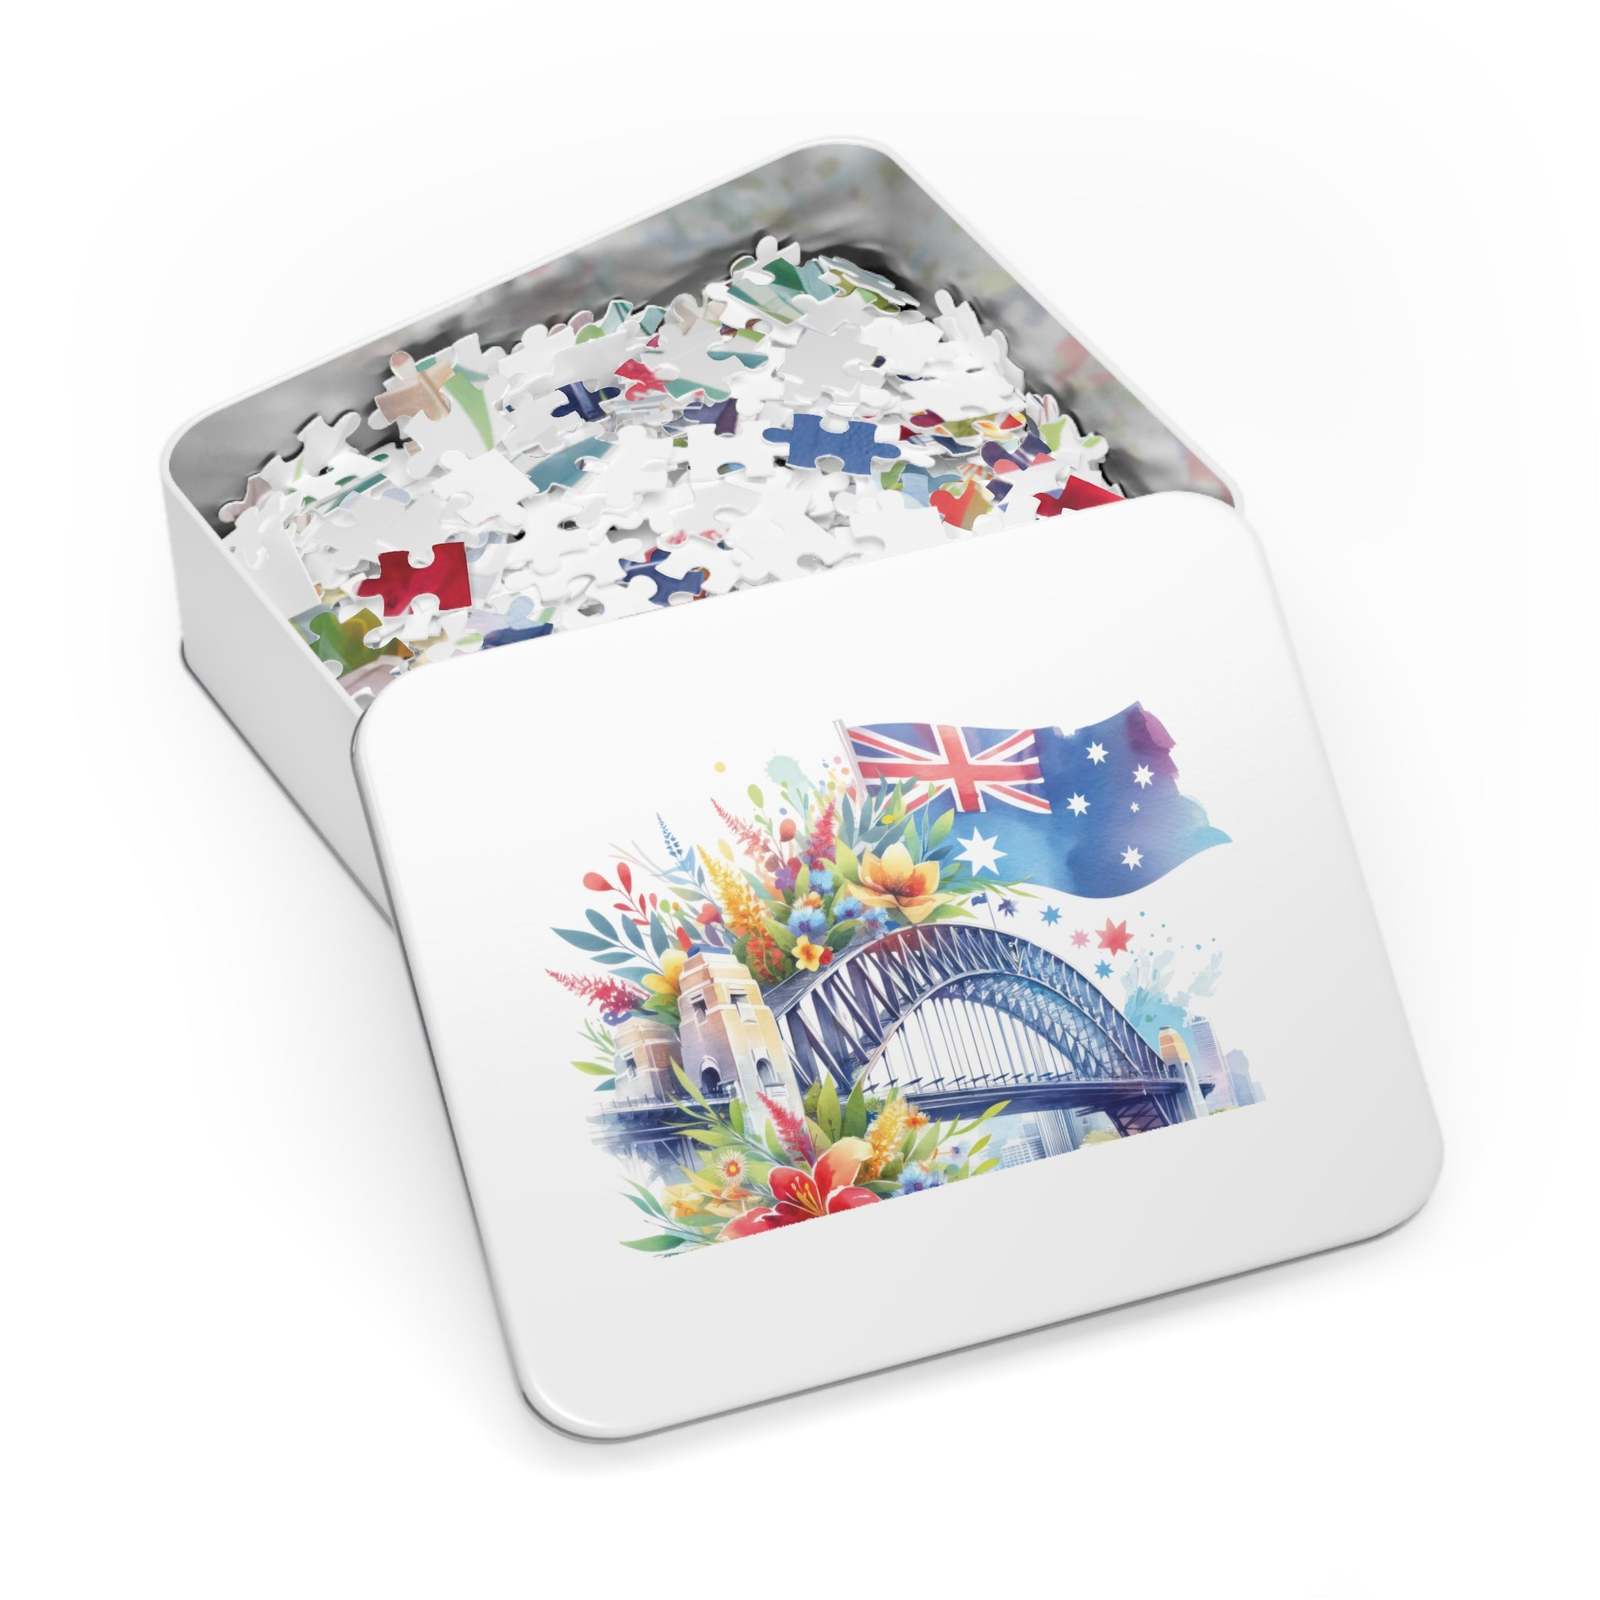 Primary image for Jigsaw Puzzle in Tin, Sydney Harbour Bridge, Australia, awd-1314, Personalised/N